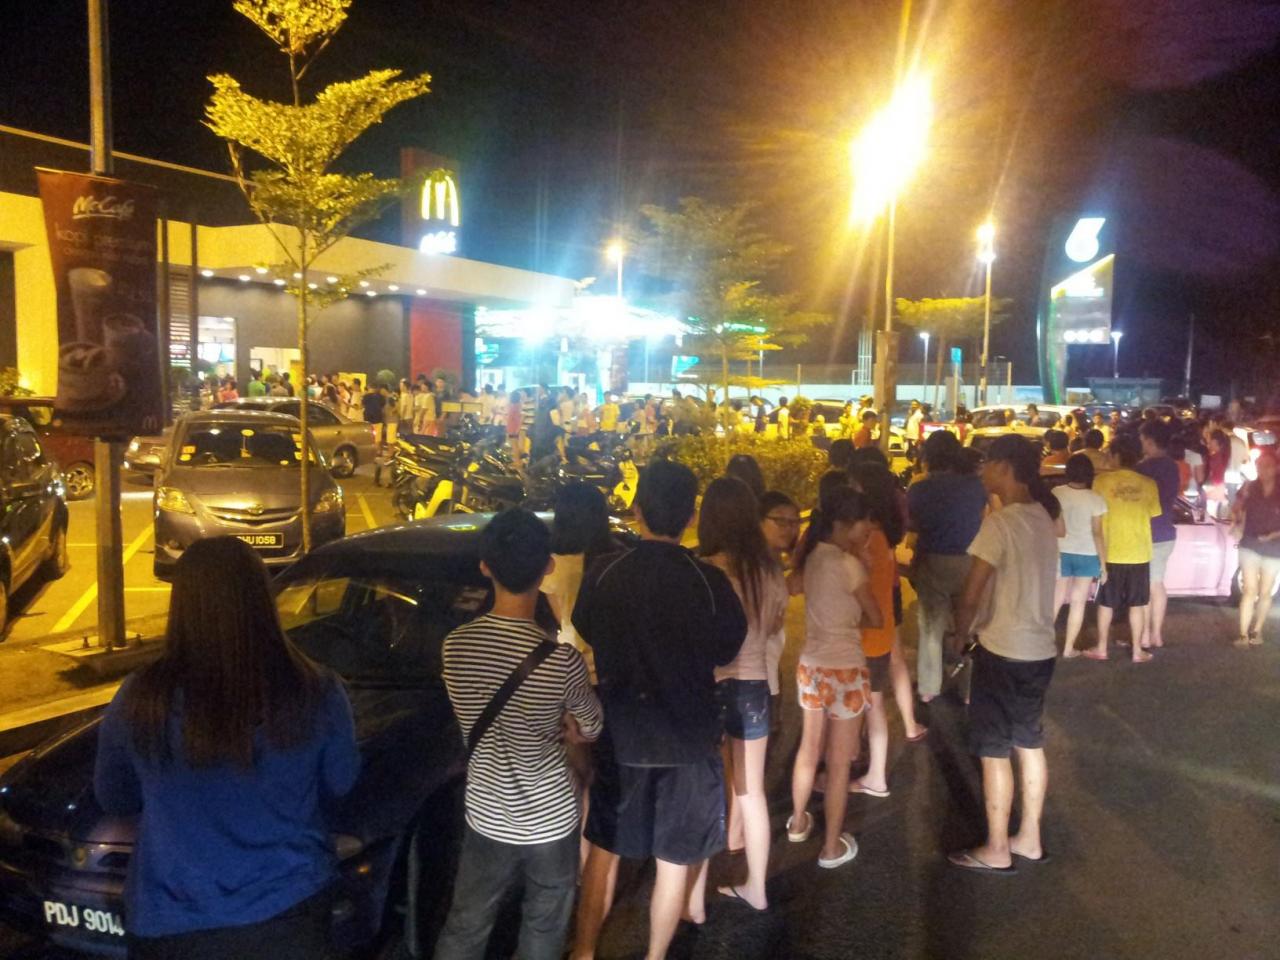 McD Minion Craze! Ppl are queuing for the Minions!